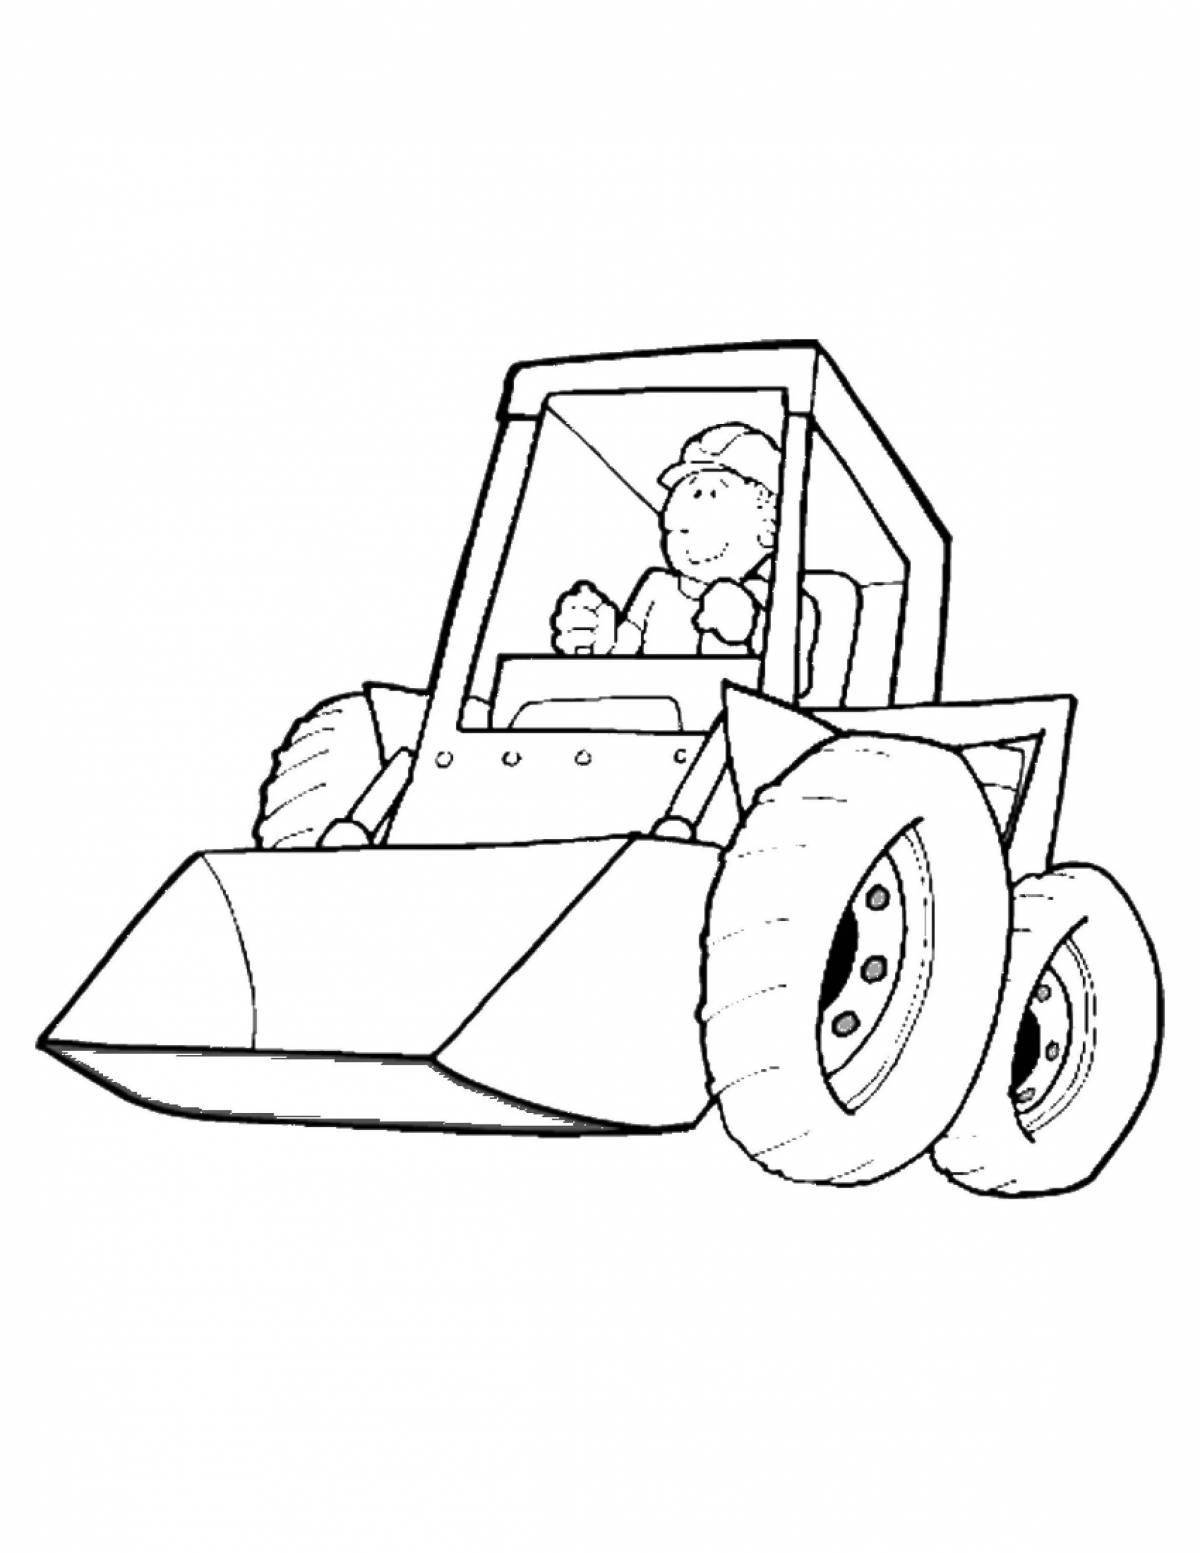 Fancy tractor loader coloring page